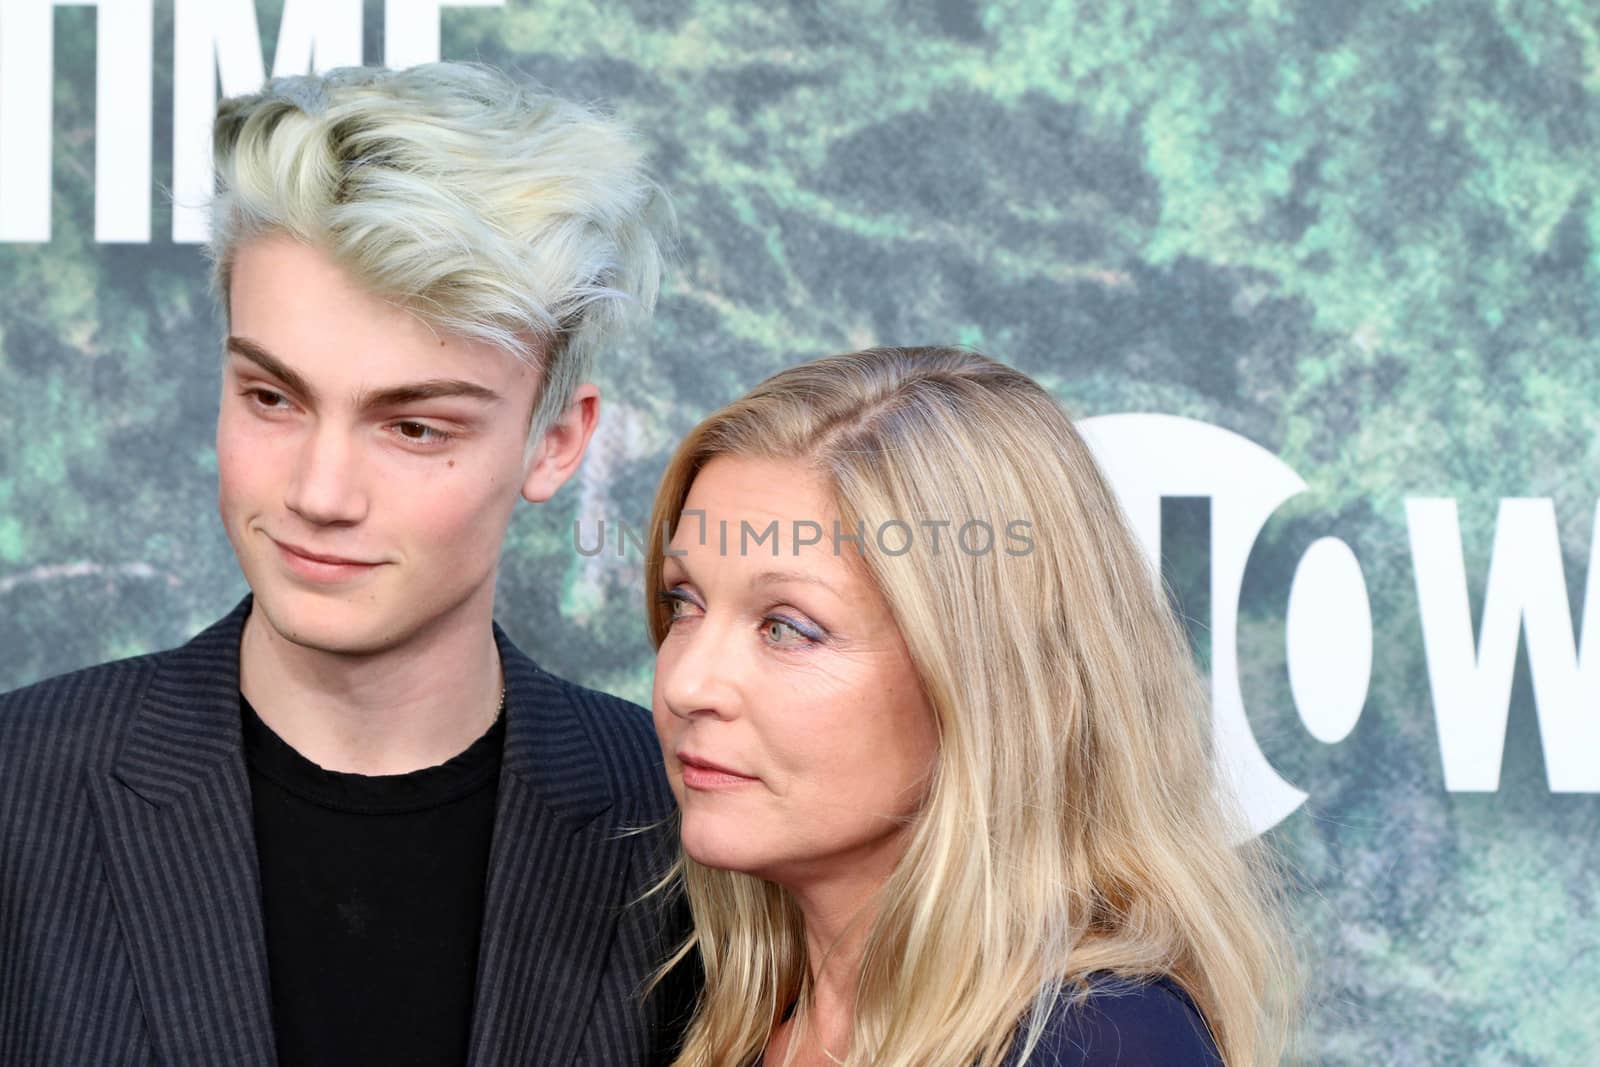 Elijah Diamond, Sheryl Lee
at the "Twin Peaks" Premiere Screening, The Theater at Ace Hotel, Los Angeles, CA 05-19-17/ImageCollect by ImageCollect